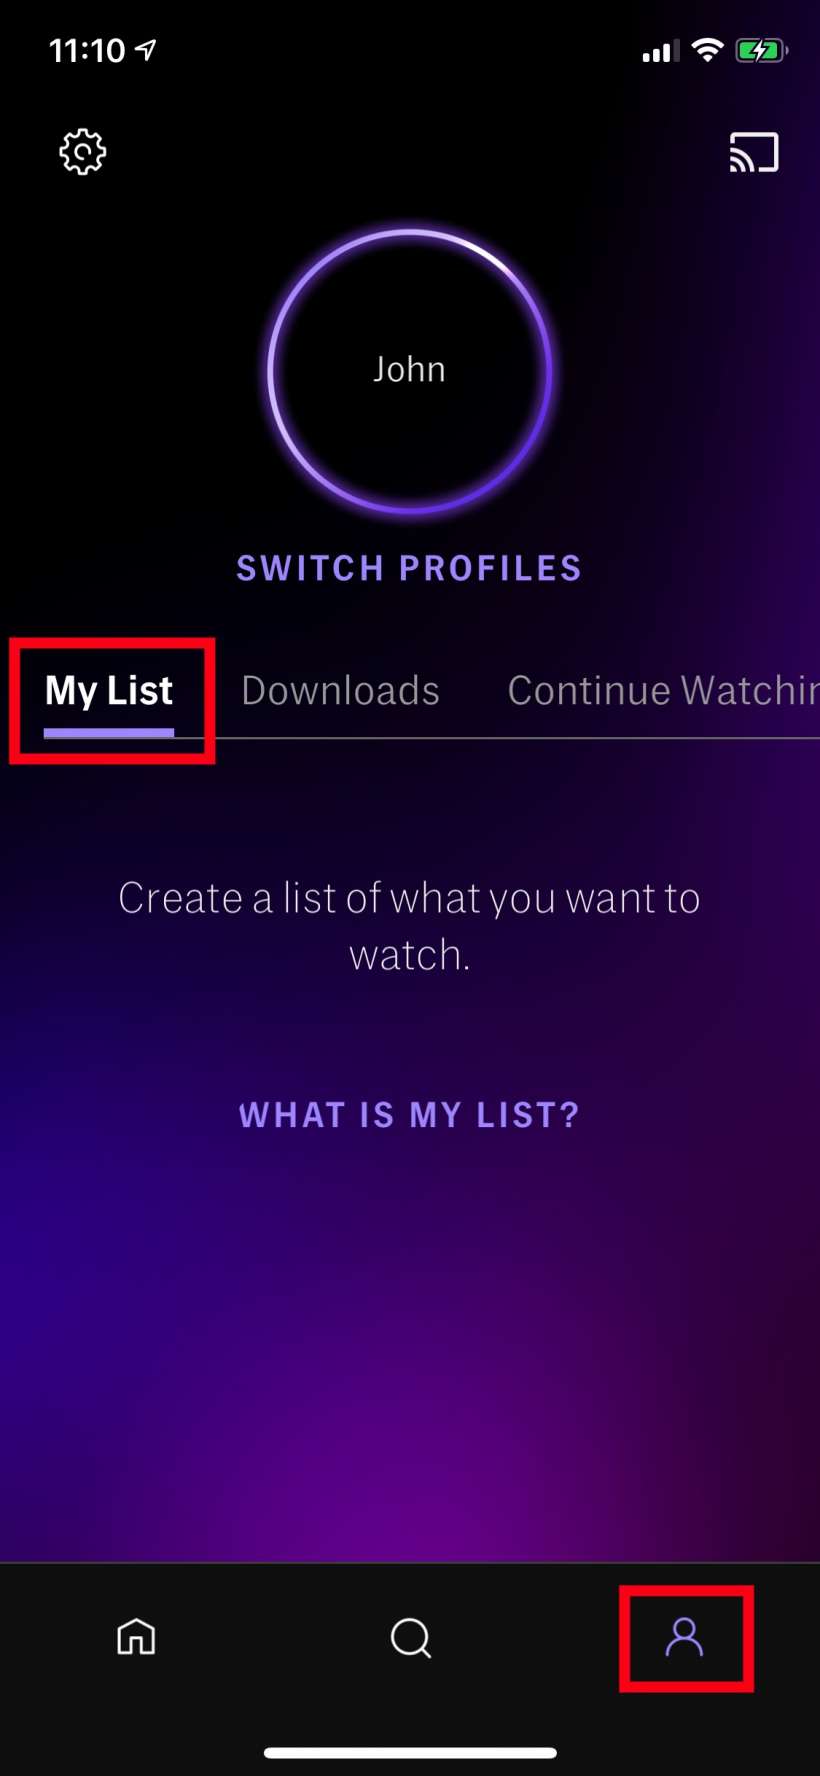 How to recover your watch list (My List) and Continue Watching list on HBO Max on iPhone and iPad.